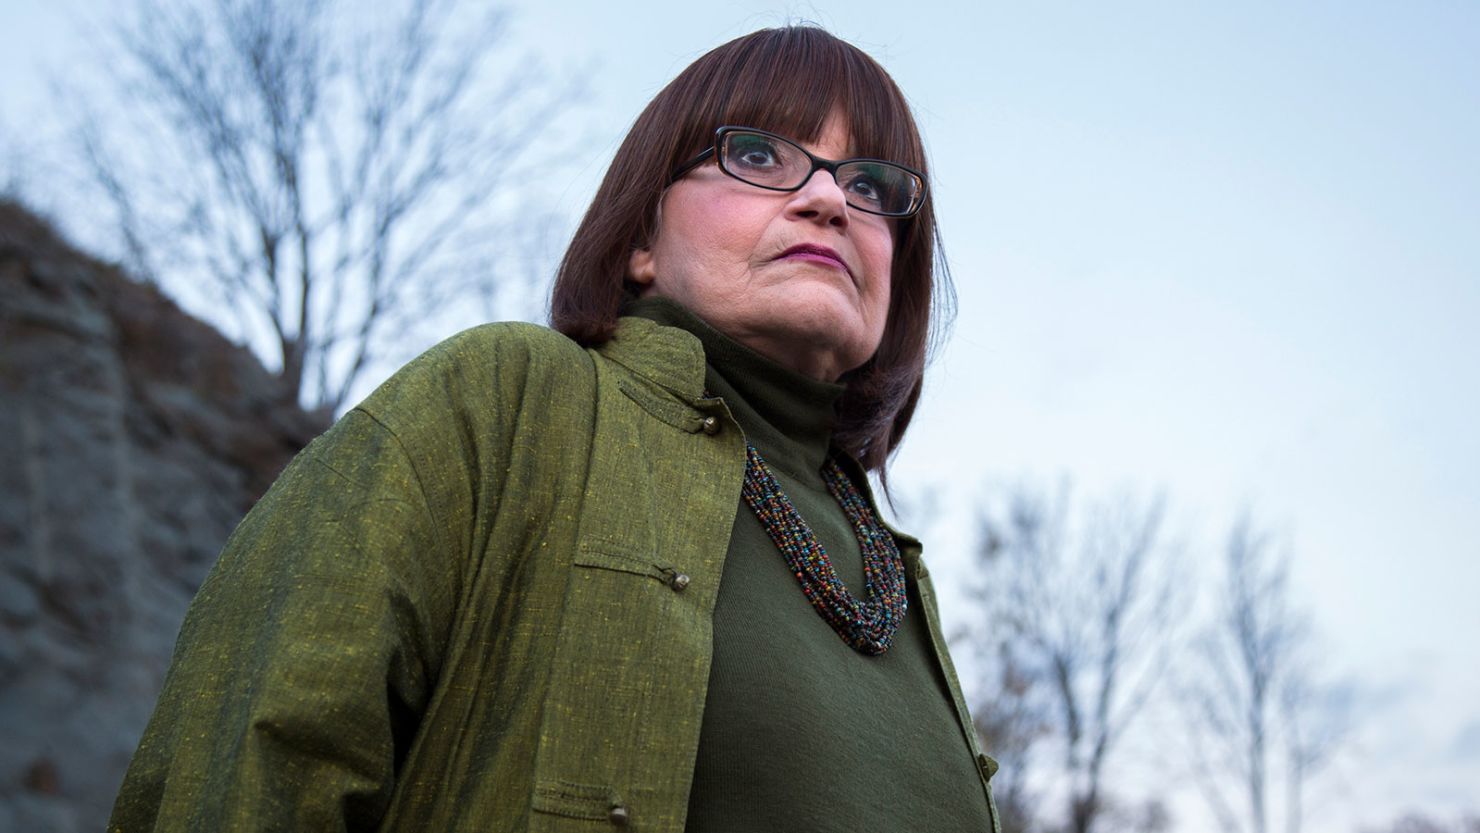 Joan Tarshis, seen here in 2014, has accused Bill Cosby of raping her when she was younger.